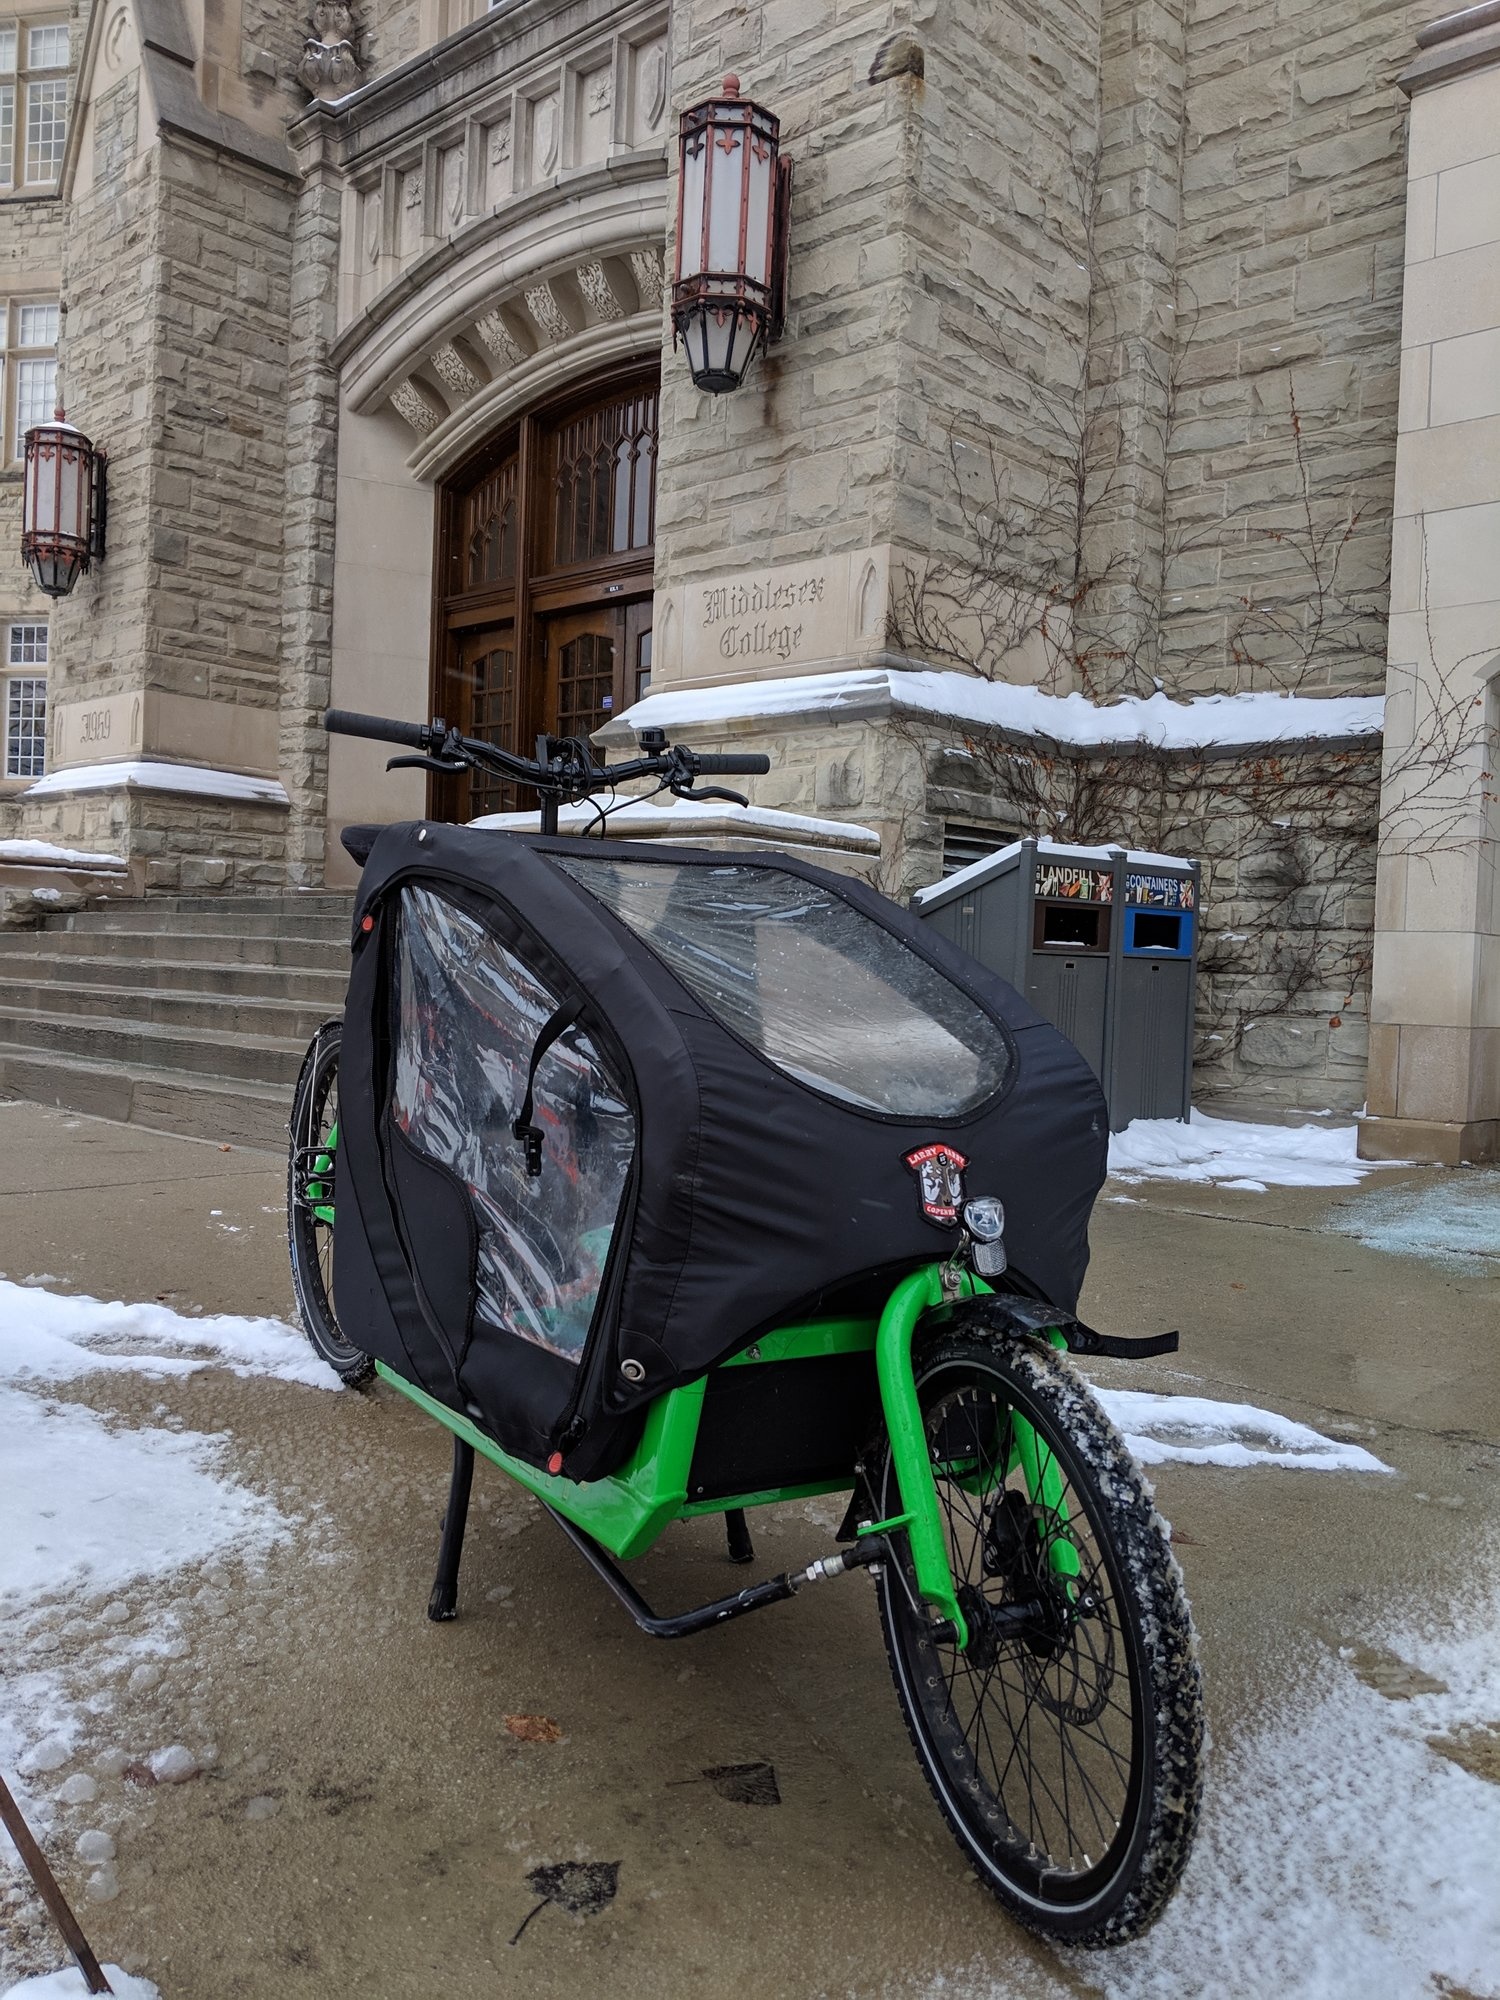 Bullitt in front of Middlesex College.